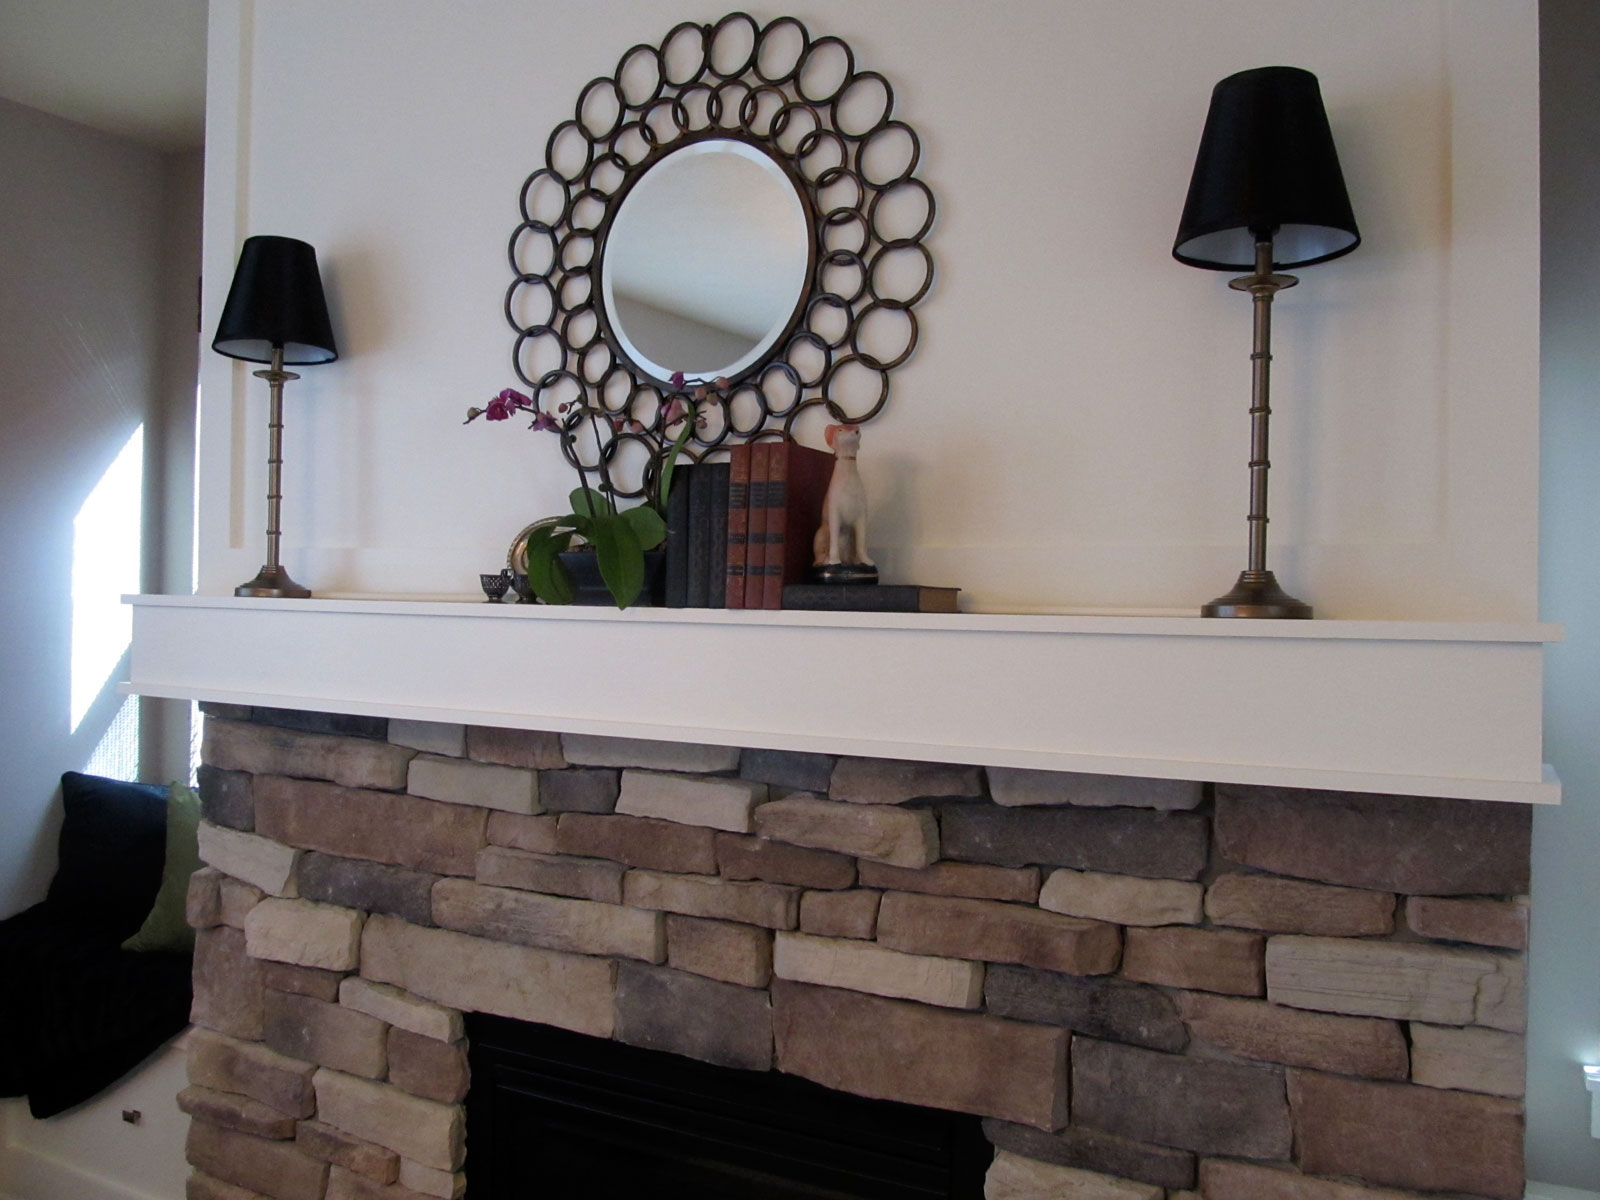 Fireplace Mantel With Modern Fireplace Mantel Designs Equipped With Modern Decorating Idea Finished In Elegant Design And New Inspiration Decoration  Fireplace Mantel Designs With Rustic Contemporary Style 